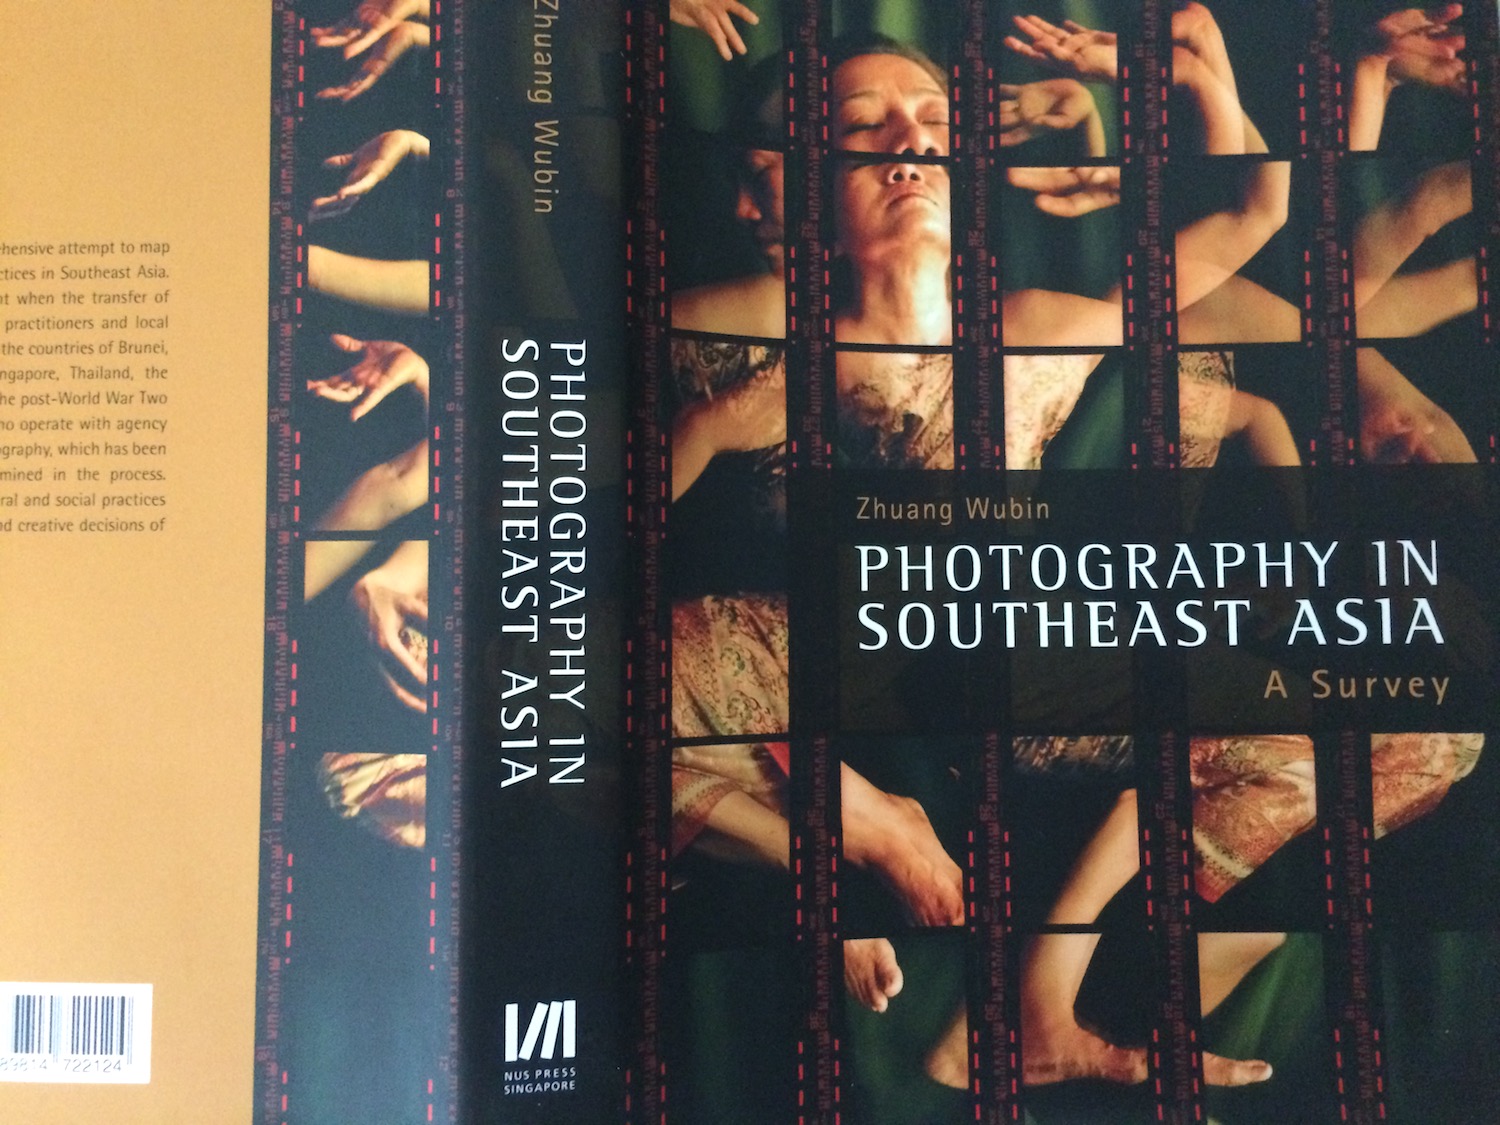 Photography in Southeast Asia - A Survey